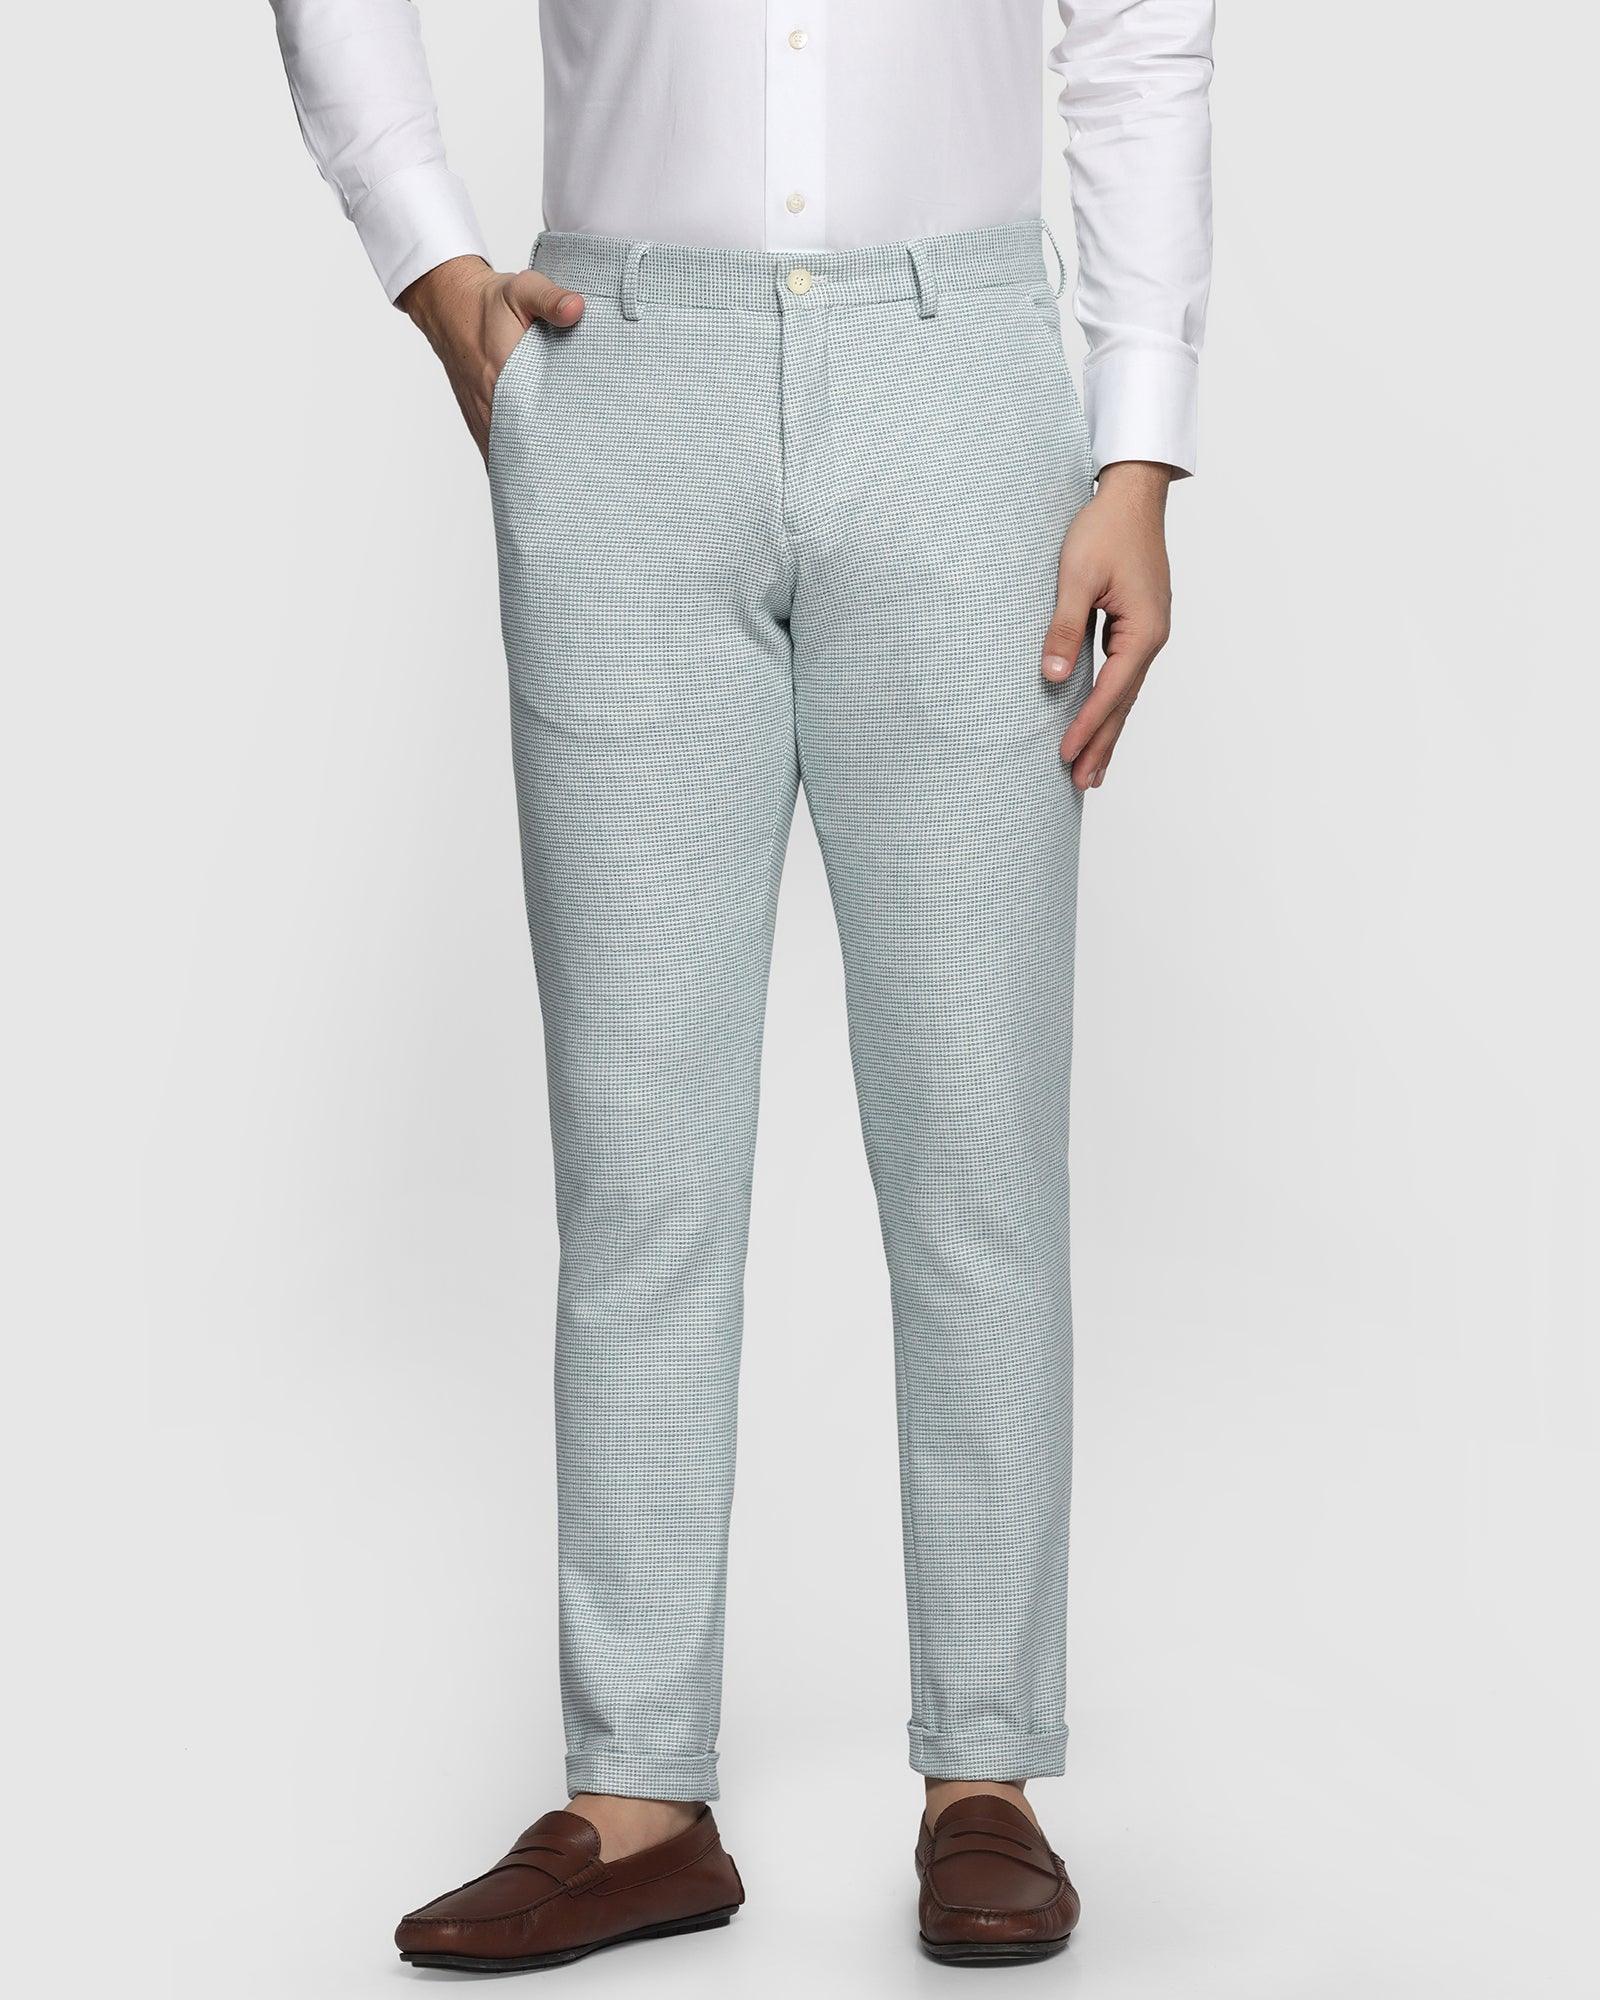 Woolrich Cotton Stretch AMERICAN Pants with Belt Loops women